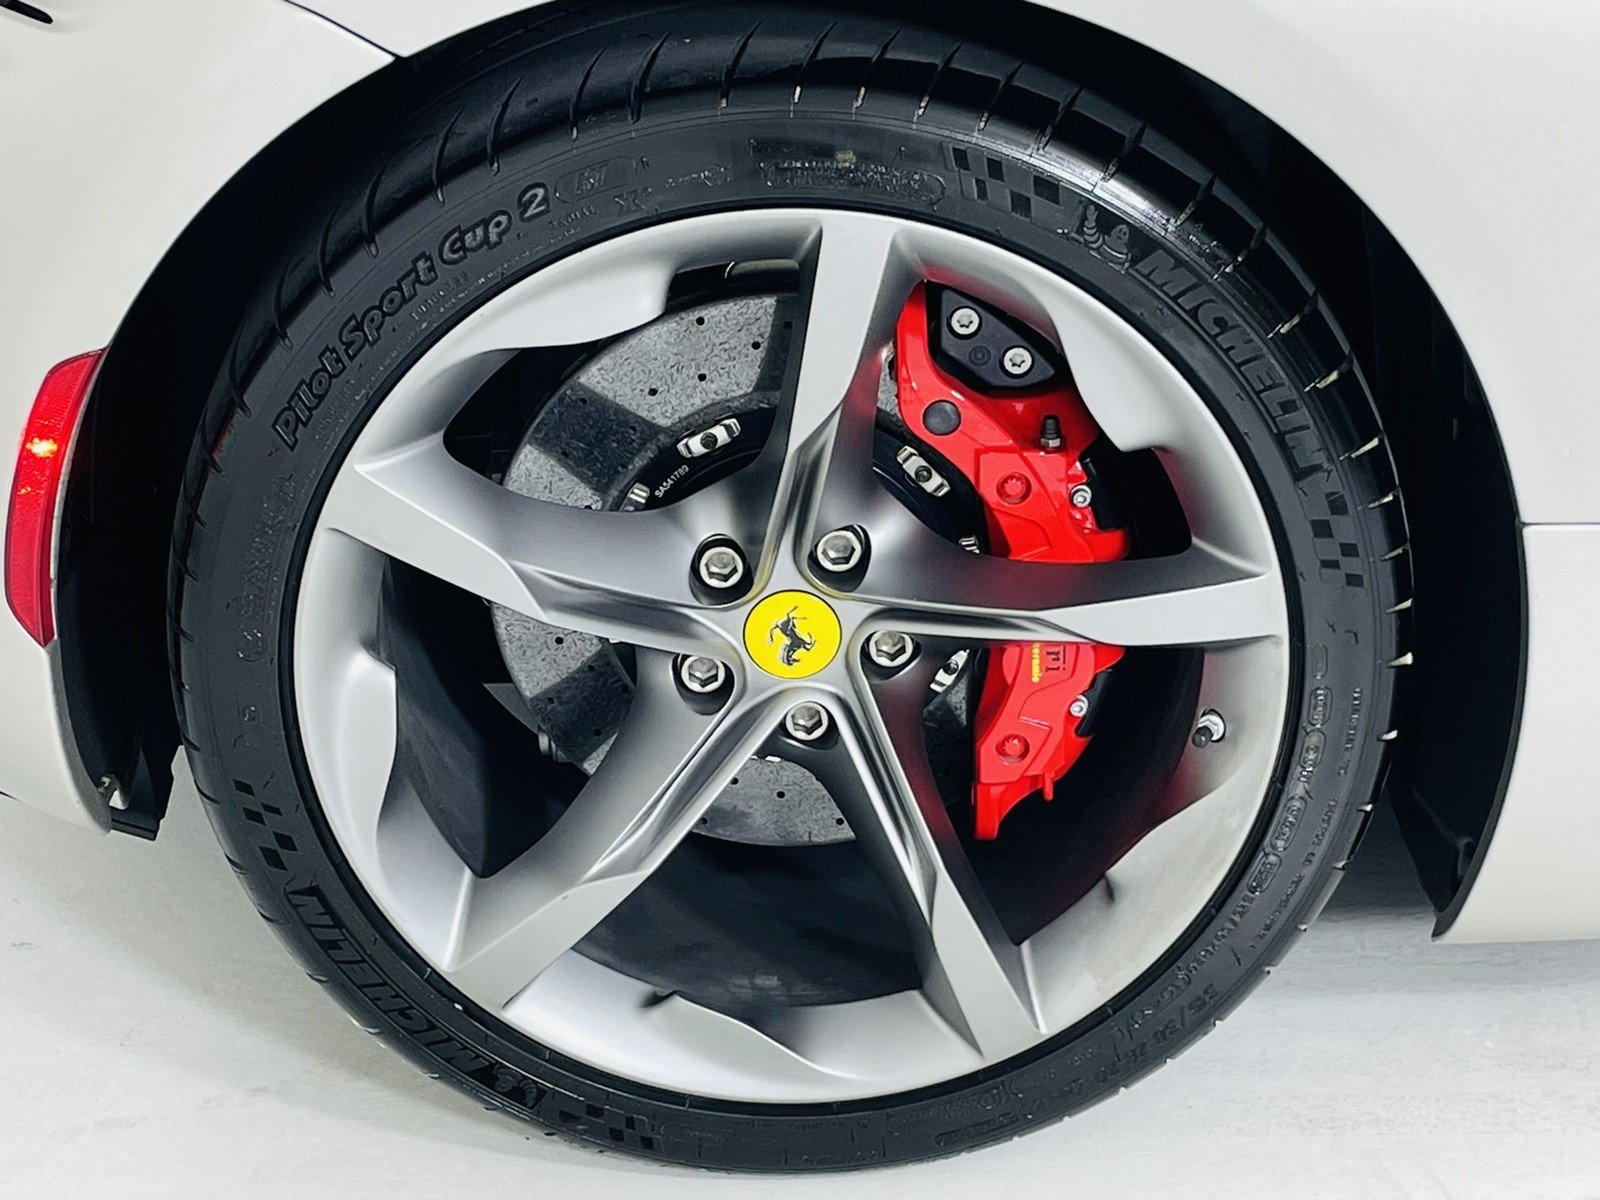 USED 2021 FERRARI SF90 STRADALE COUPE W A 650K MSRP FOR SALE (12)